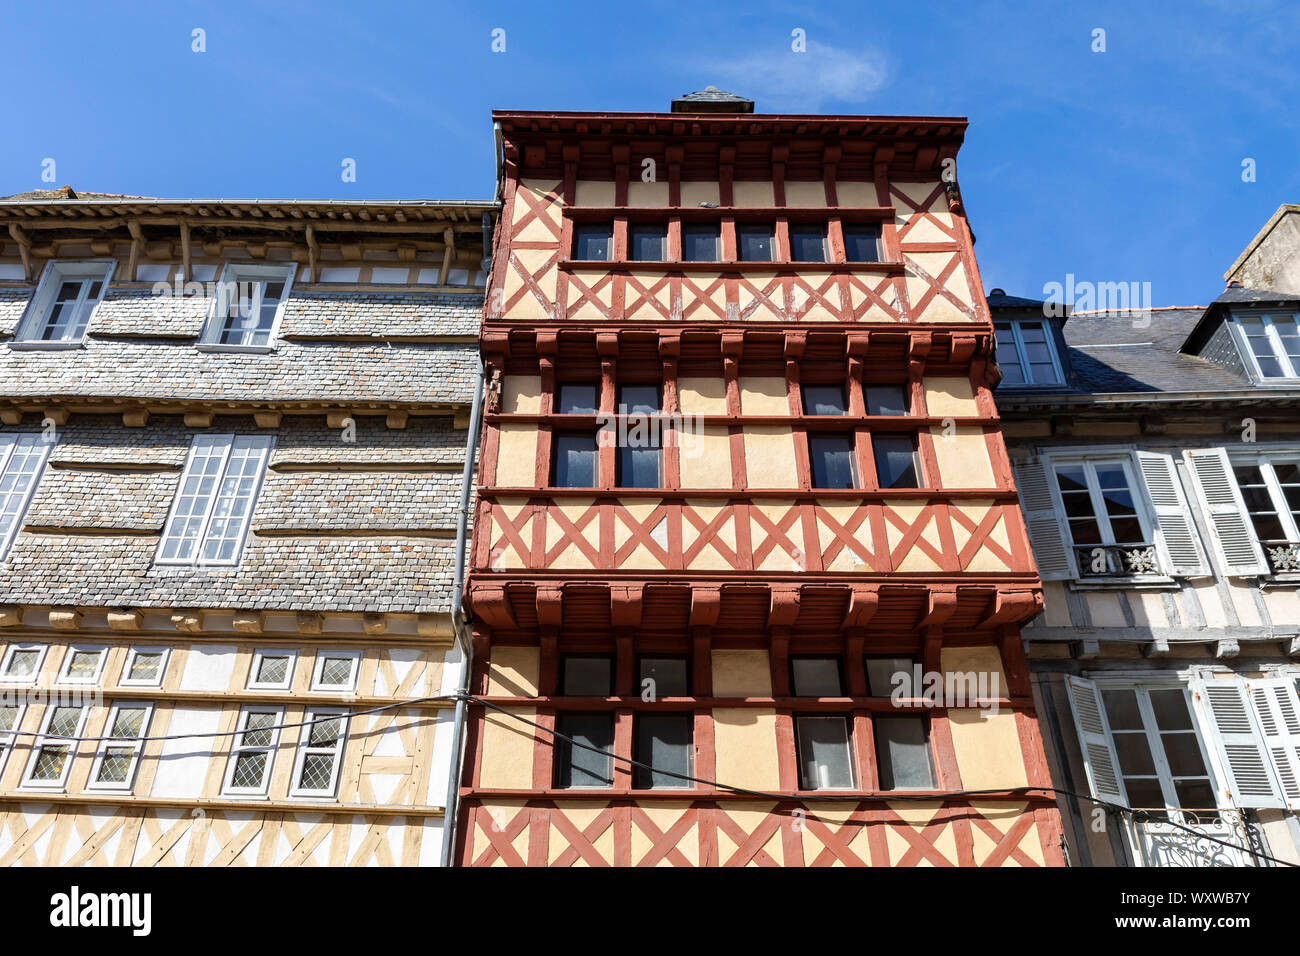 Quimper (Brittany, north-western France): medieval half-timbered houses in the city centre Stock Photo